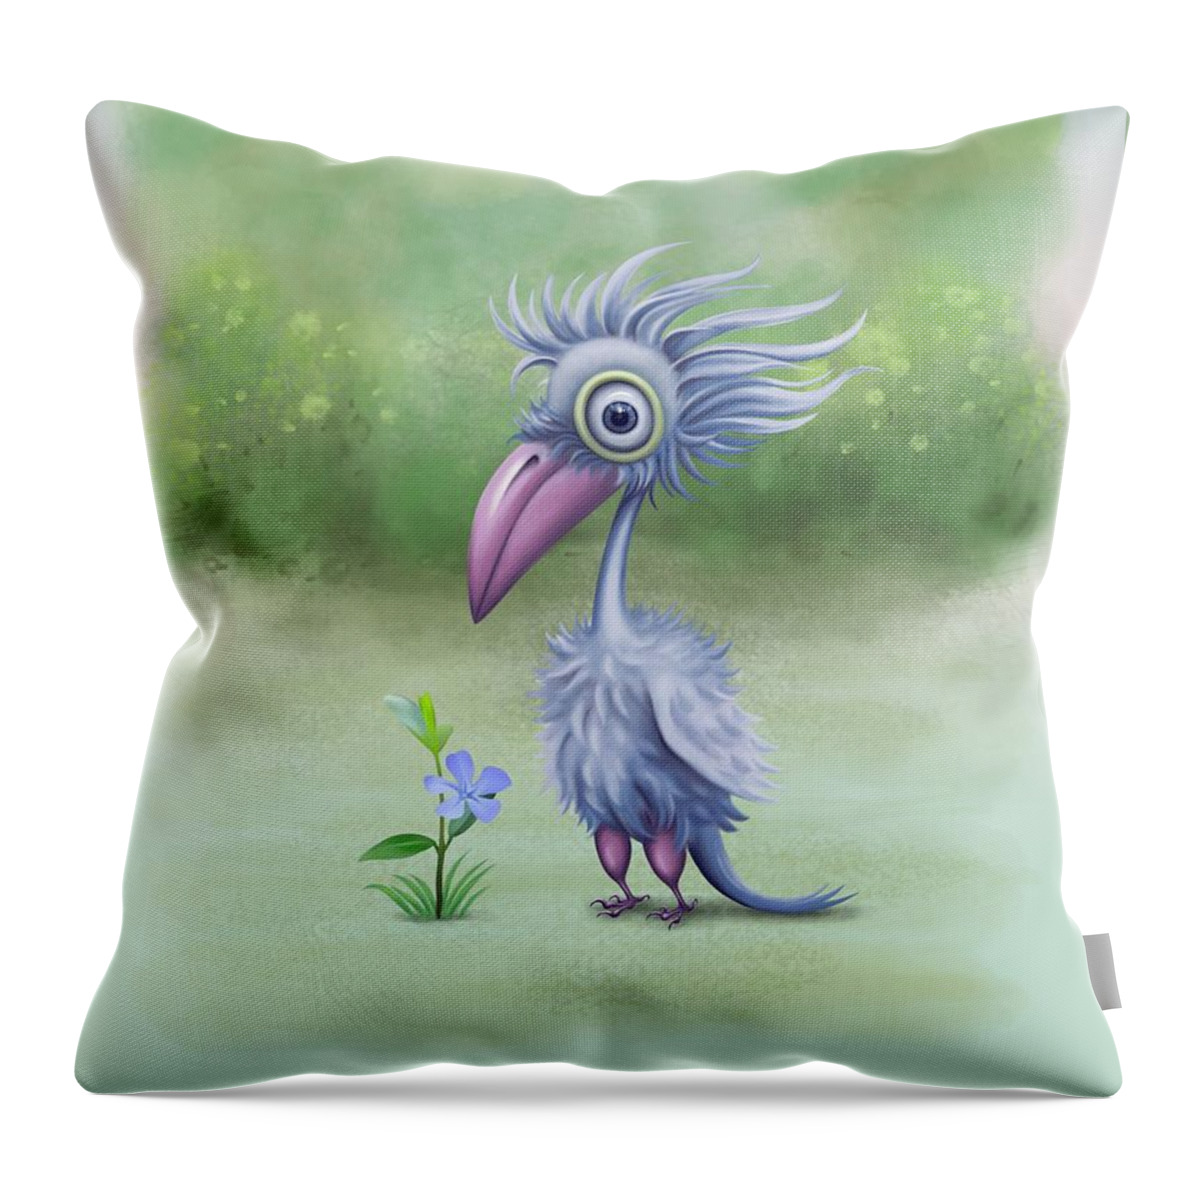 Cute Throw Pillow featuring the painting Beauty is subjective by Ivana Westin